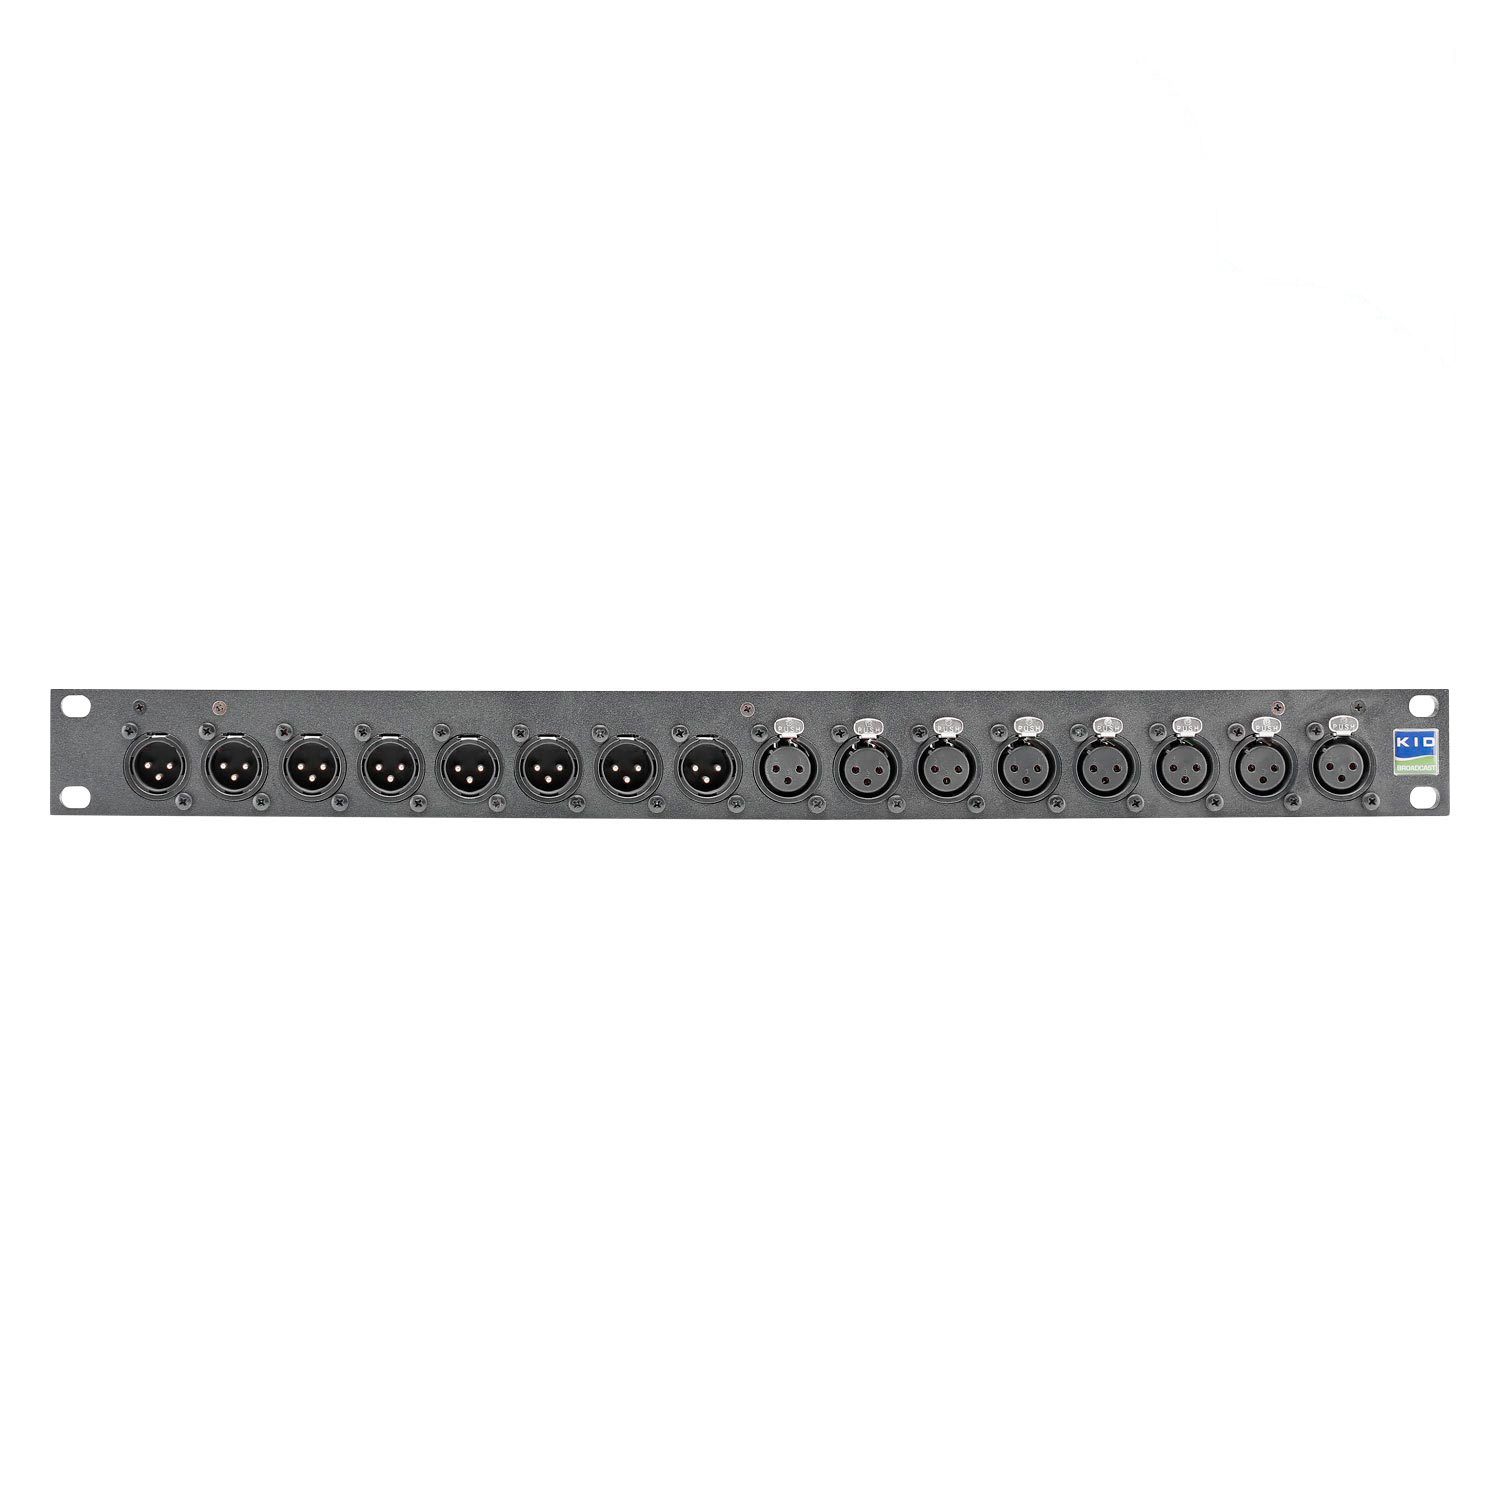 Sommer cable Audio-connection panel XLR , 1 HE, 12 BE, XLR 3-pole male/XLR 3-pole female, 4 mm powder-coated aluminum, colour: graphite gray RAL 7024